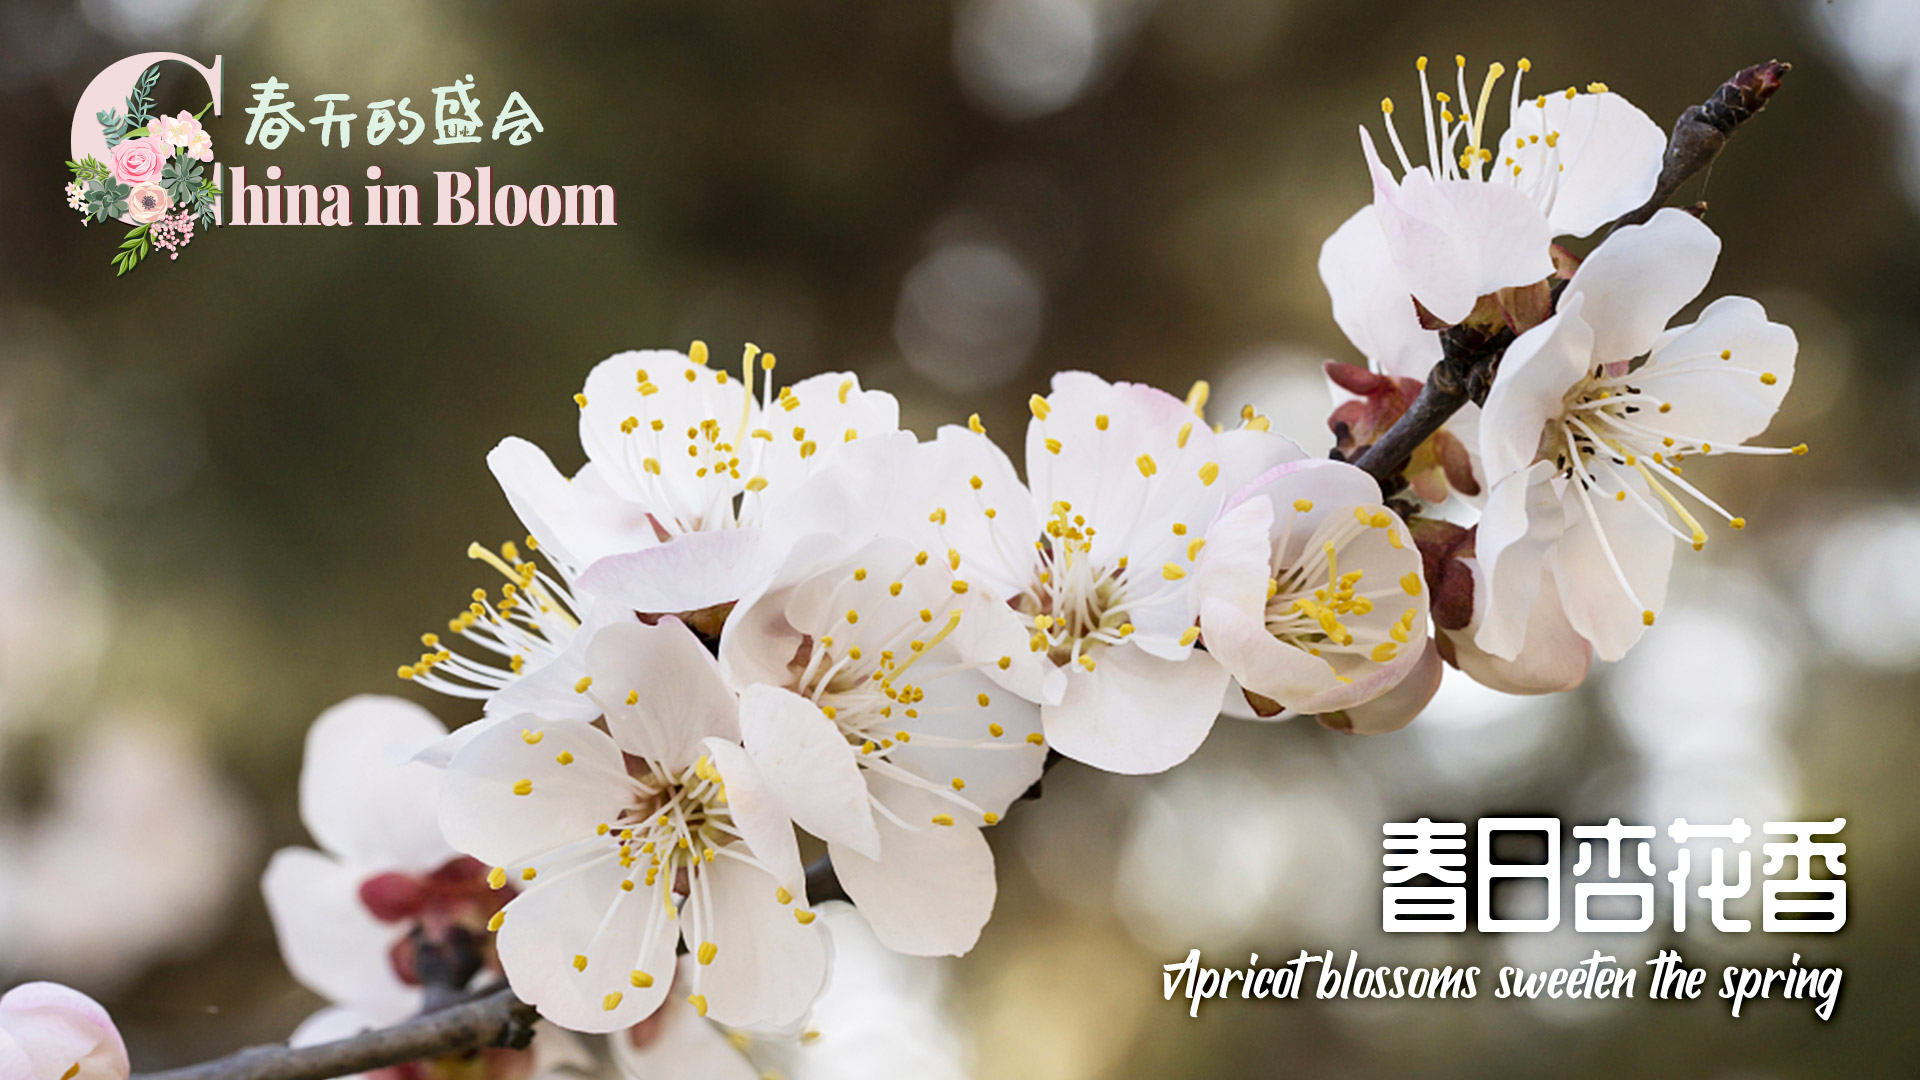 China in Bloom: Apricot blossoms sweeten the spring air